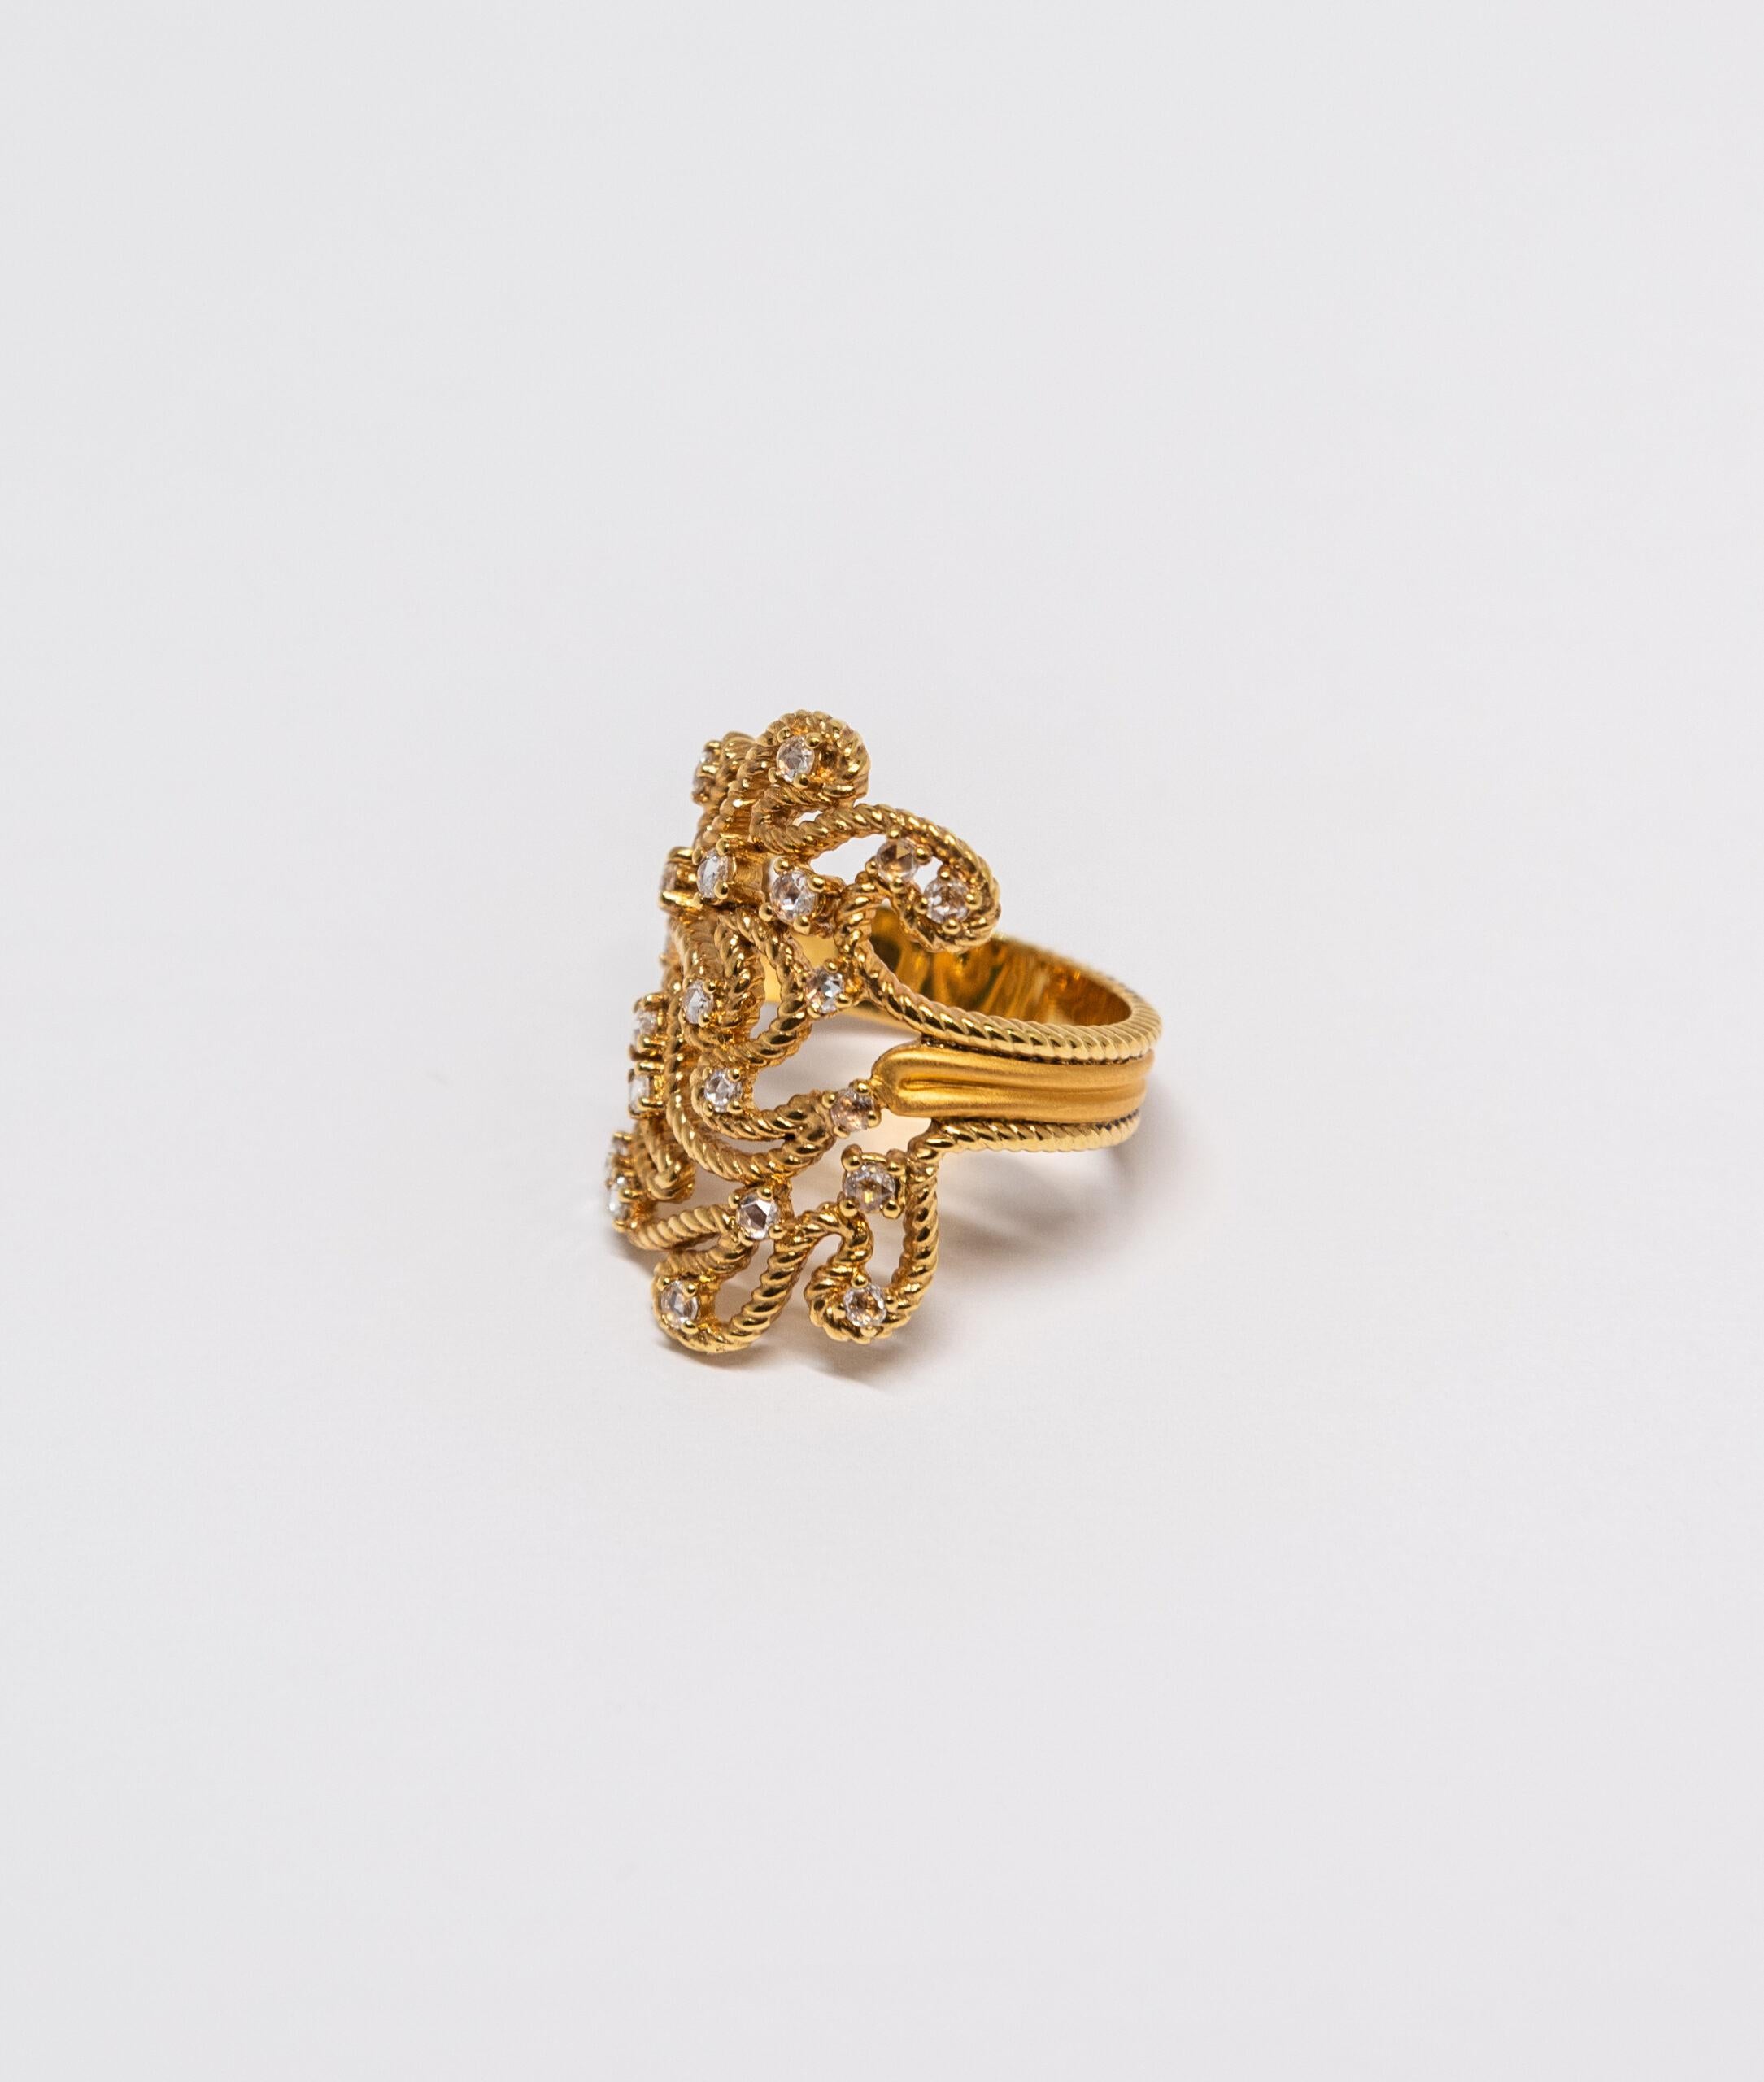 This ring is made of 18K Yellow Gold. Face side set with 22 Diamonds.

Size – 54.5 (7 US)